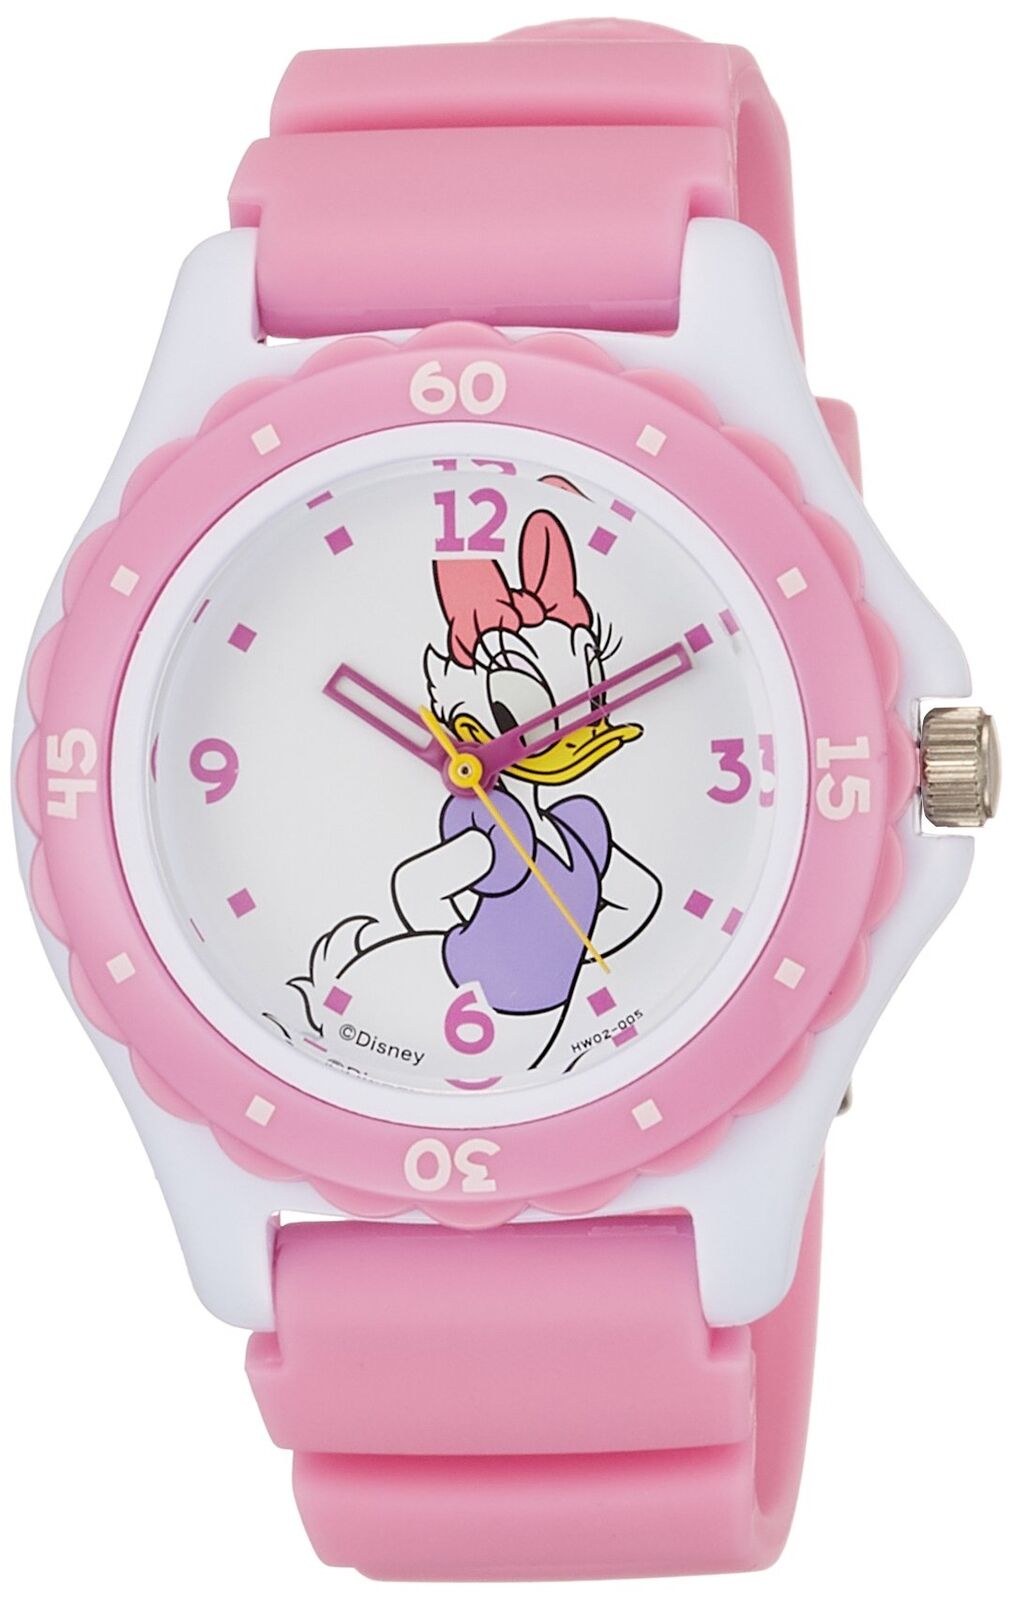 [Cue and Cue] Watch Disney Collection Daisy Duck HW02-005 Girls Pink